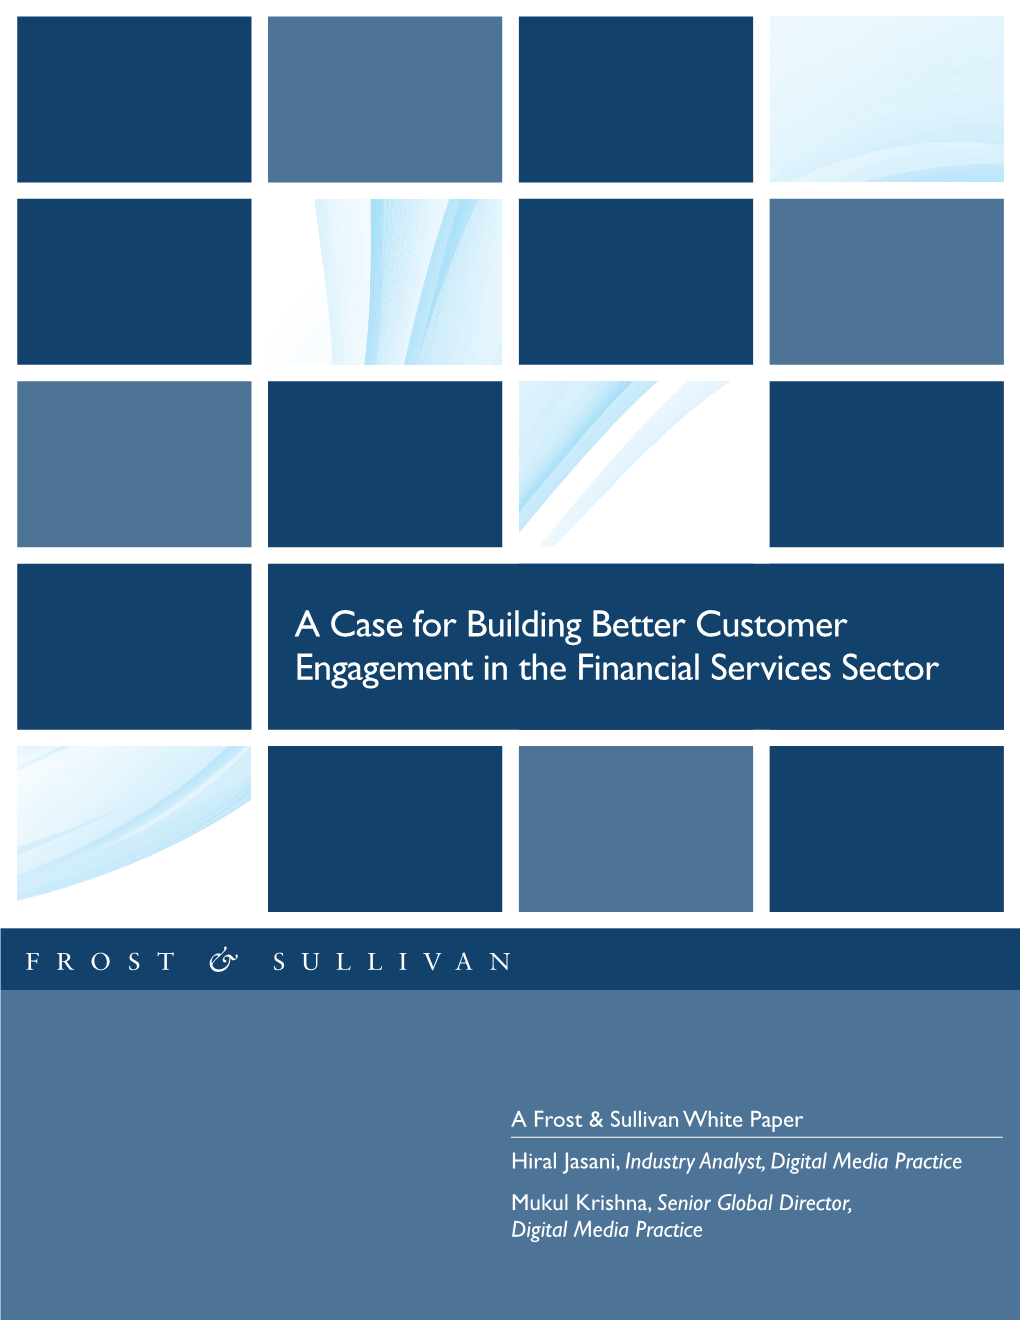 A Case for Building Better Customer Engagement in the Financial Services Sector